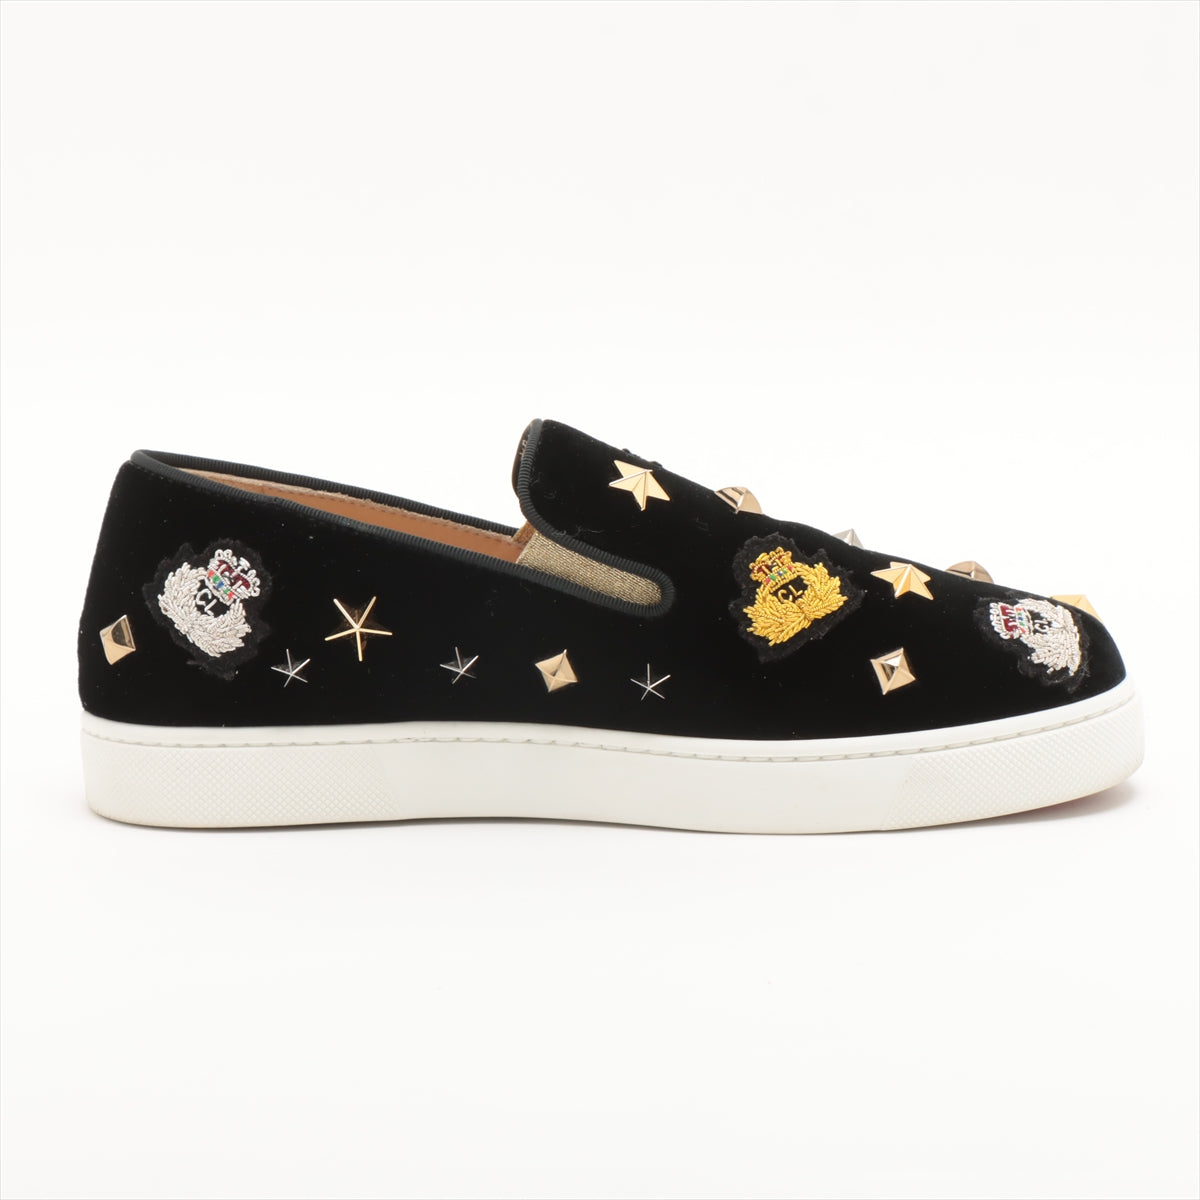 Christian Louboutin Velour Slip-on 36 Ladies' Black Miss Academy Studs Box sack There are replacement studs